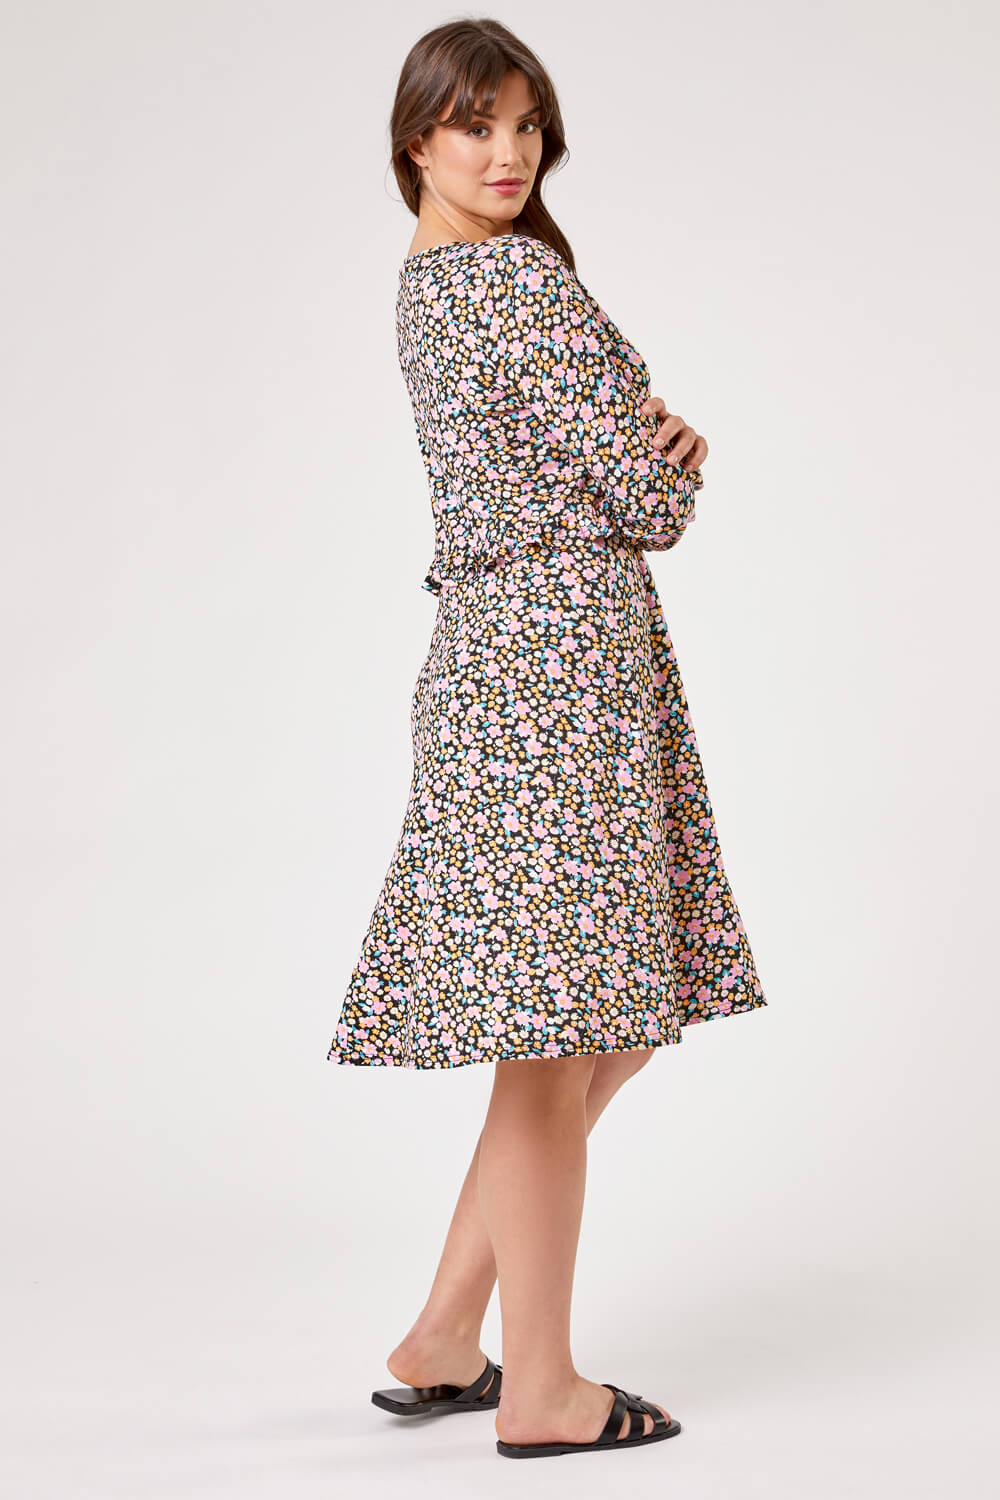 PINK Curve Frill Detail Floral Print Dress, Image 2 of 5